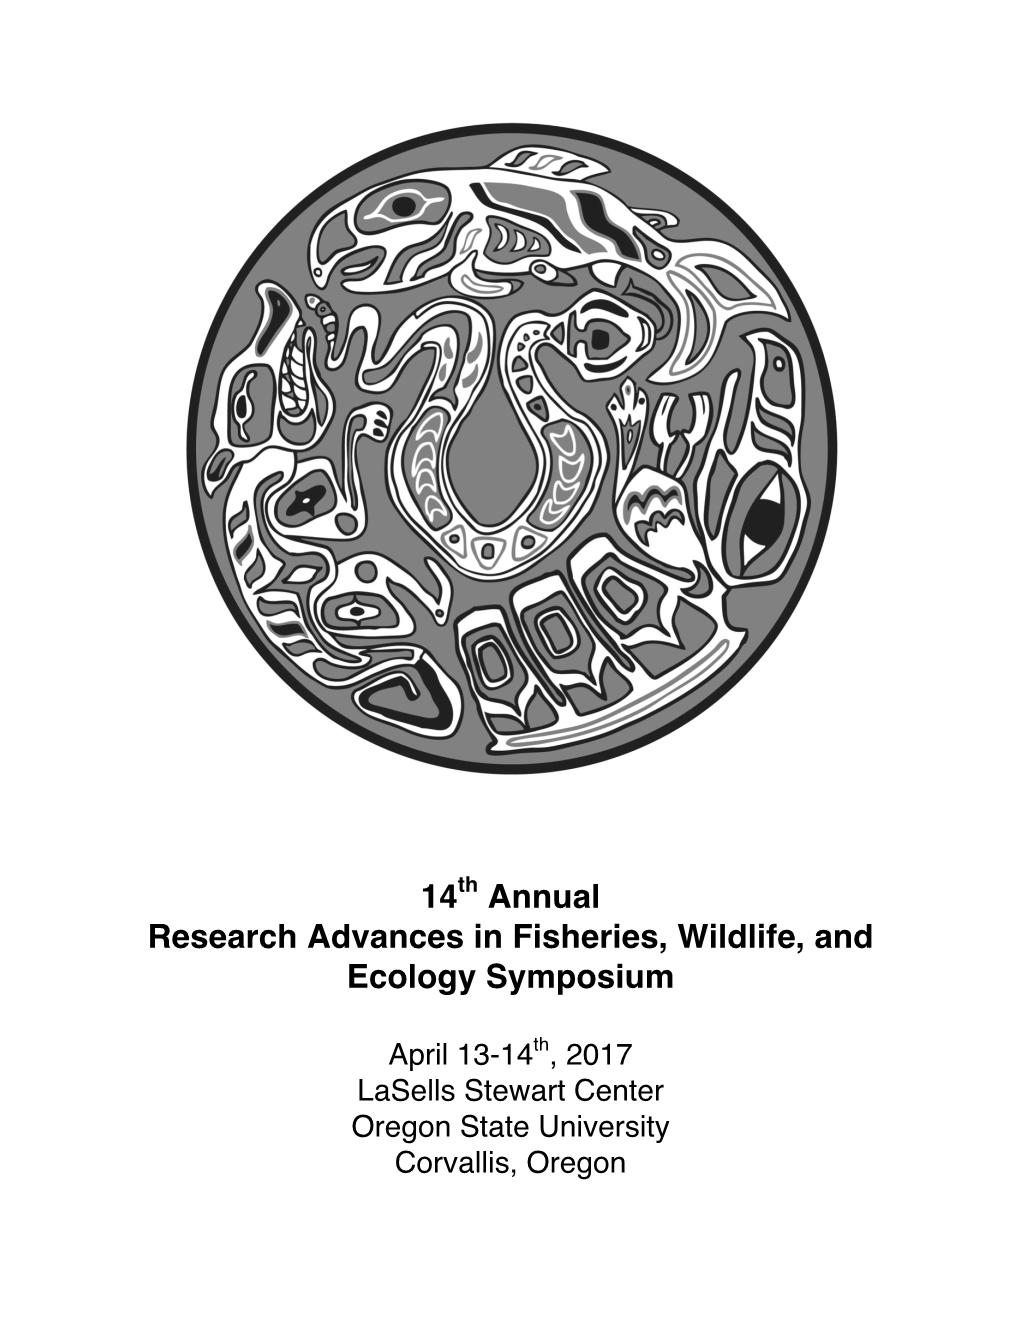 14 Annual Research Advances in Fisheries, Wildlife, and Ecology